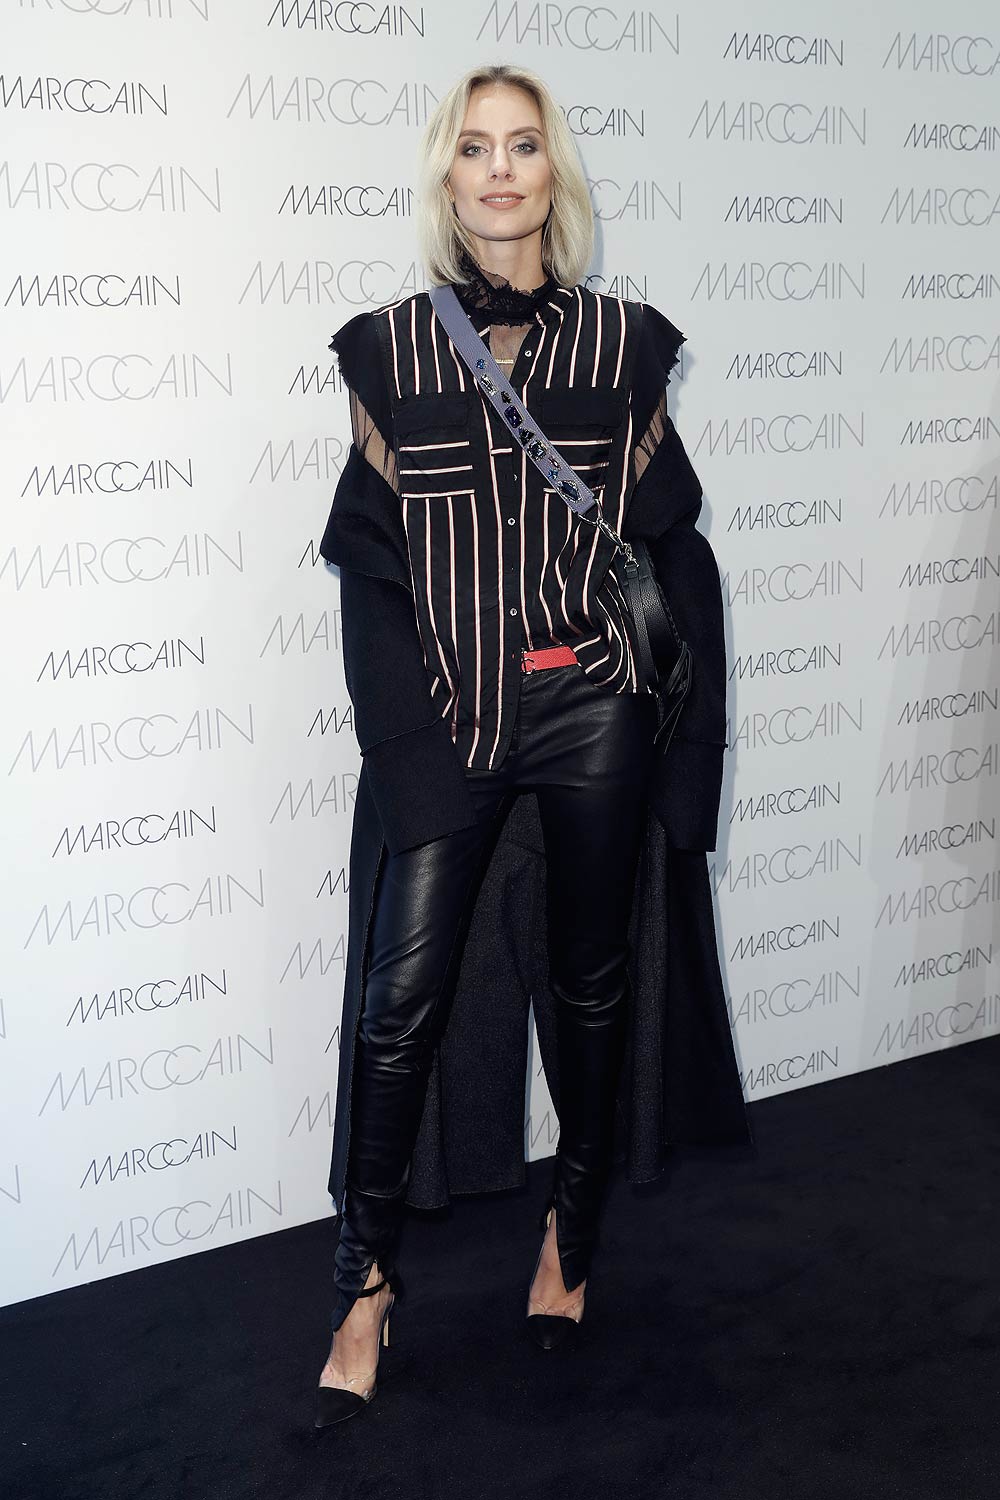 Lisa Hahnbueck attends the Marc Cain fashion show A/W 2017